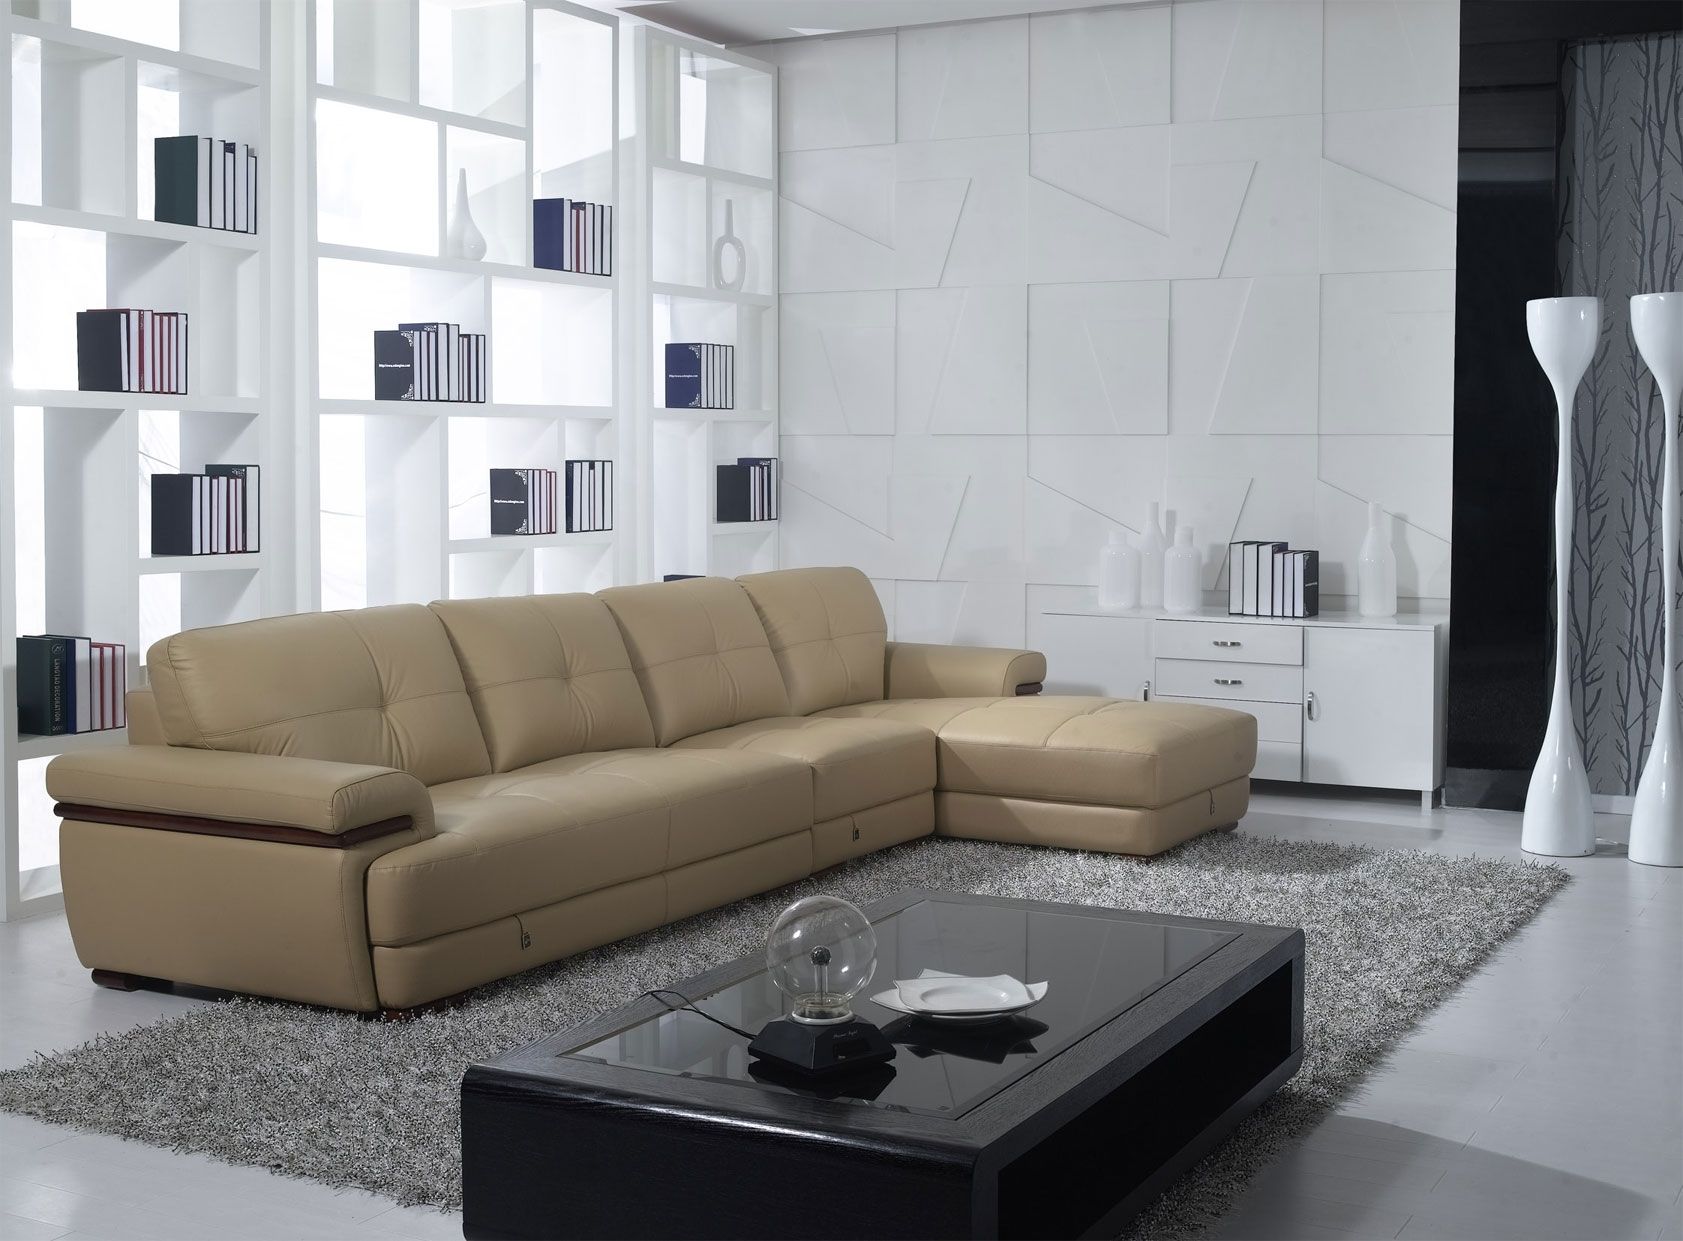 Fancy Quality Sectional Sofas 15 And Couches Ideas With High Sofa For High Quality Sectional Sofas (View 3 of 10)